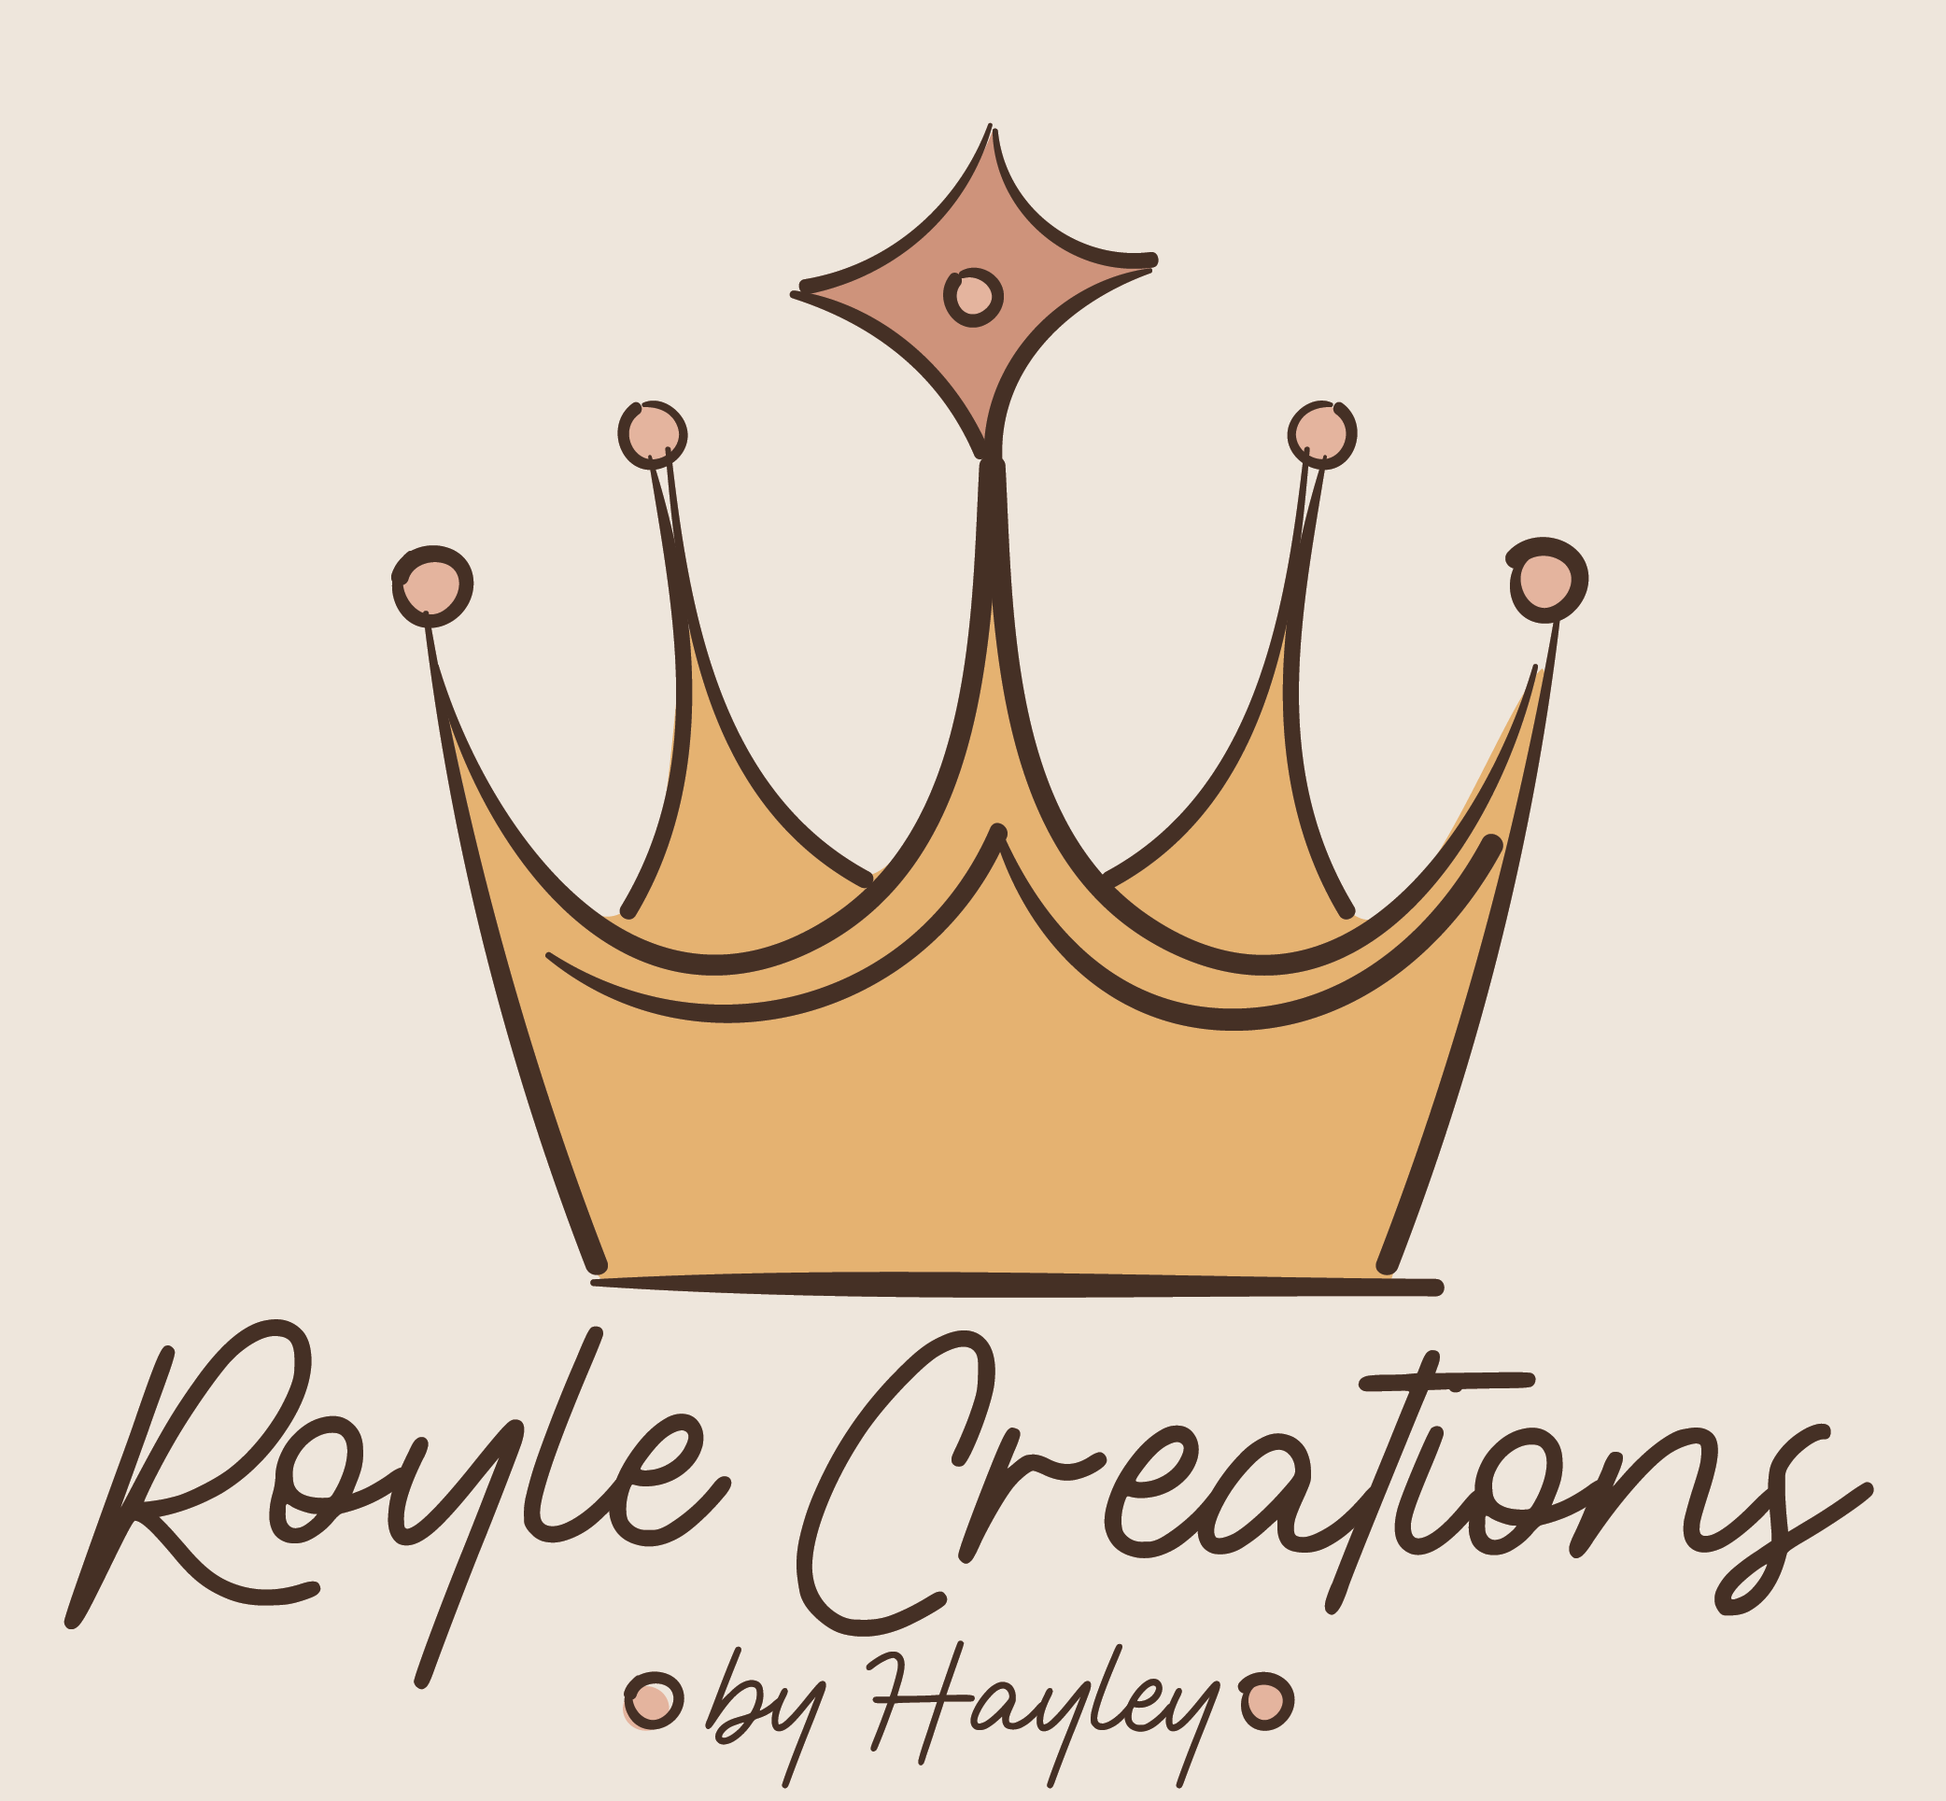 Royle Creations Gift Card with golden yellow crown and pink accents